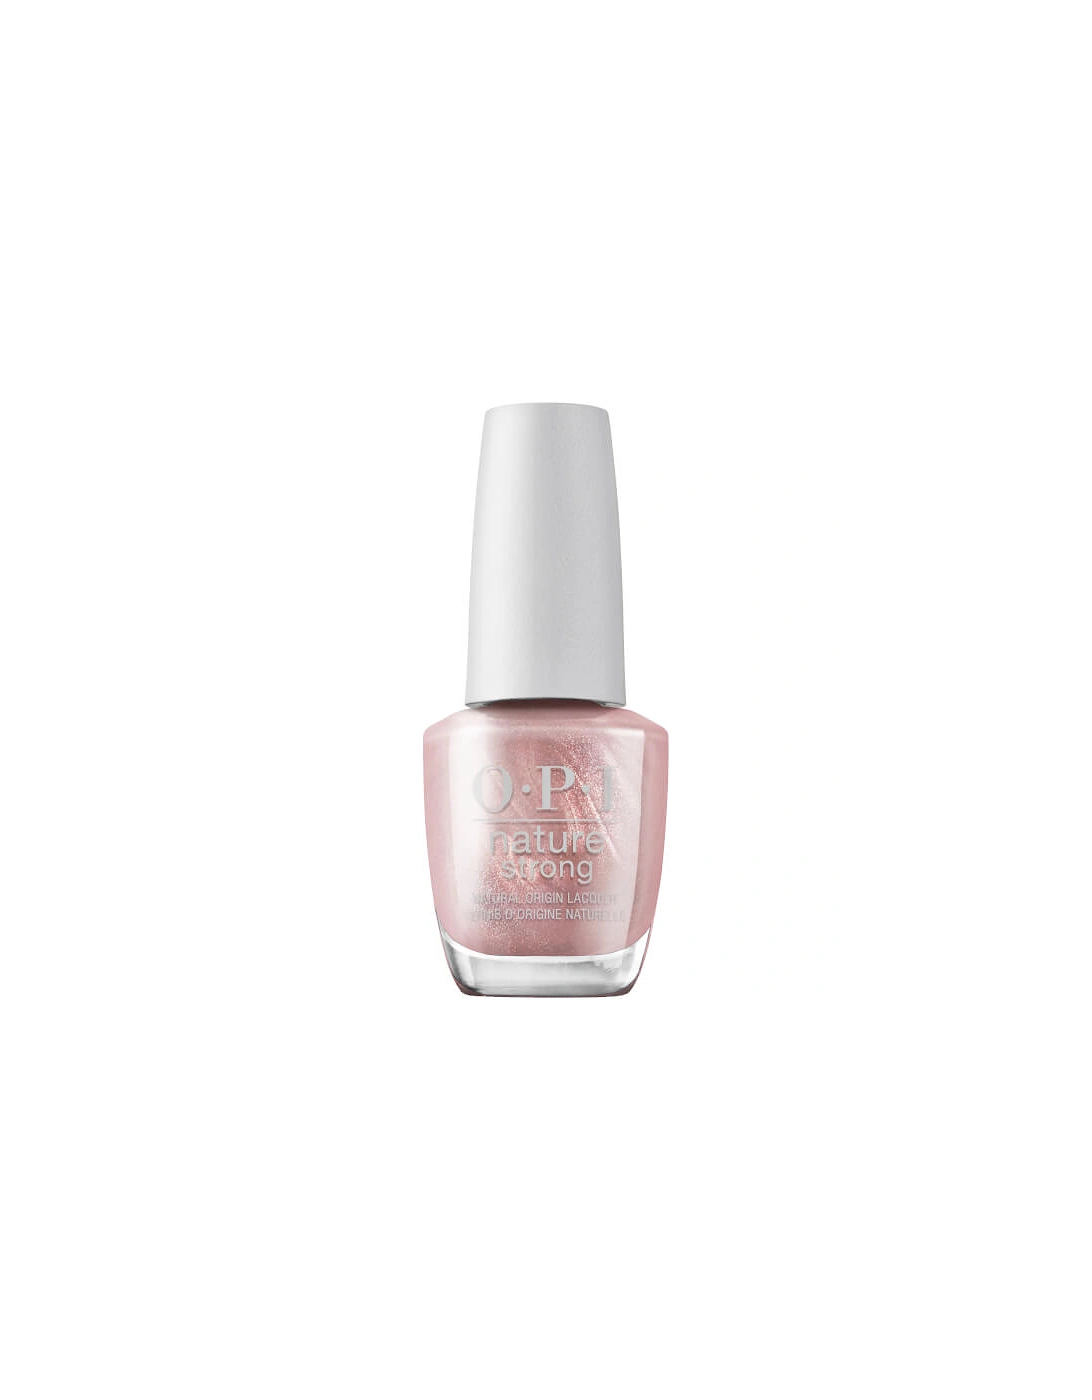 Nature Strong Vegan Nail Polish - Intentions are Rose Gold 15ml, 2 of 1